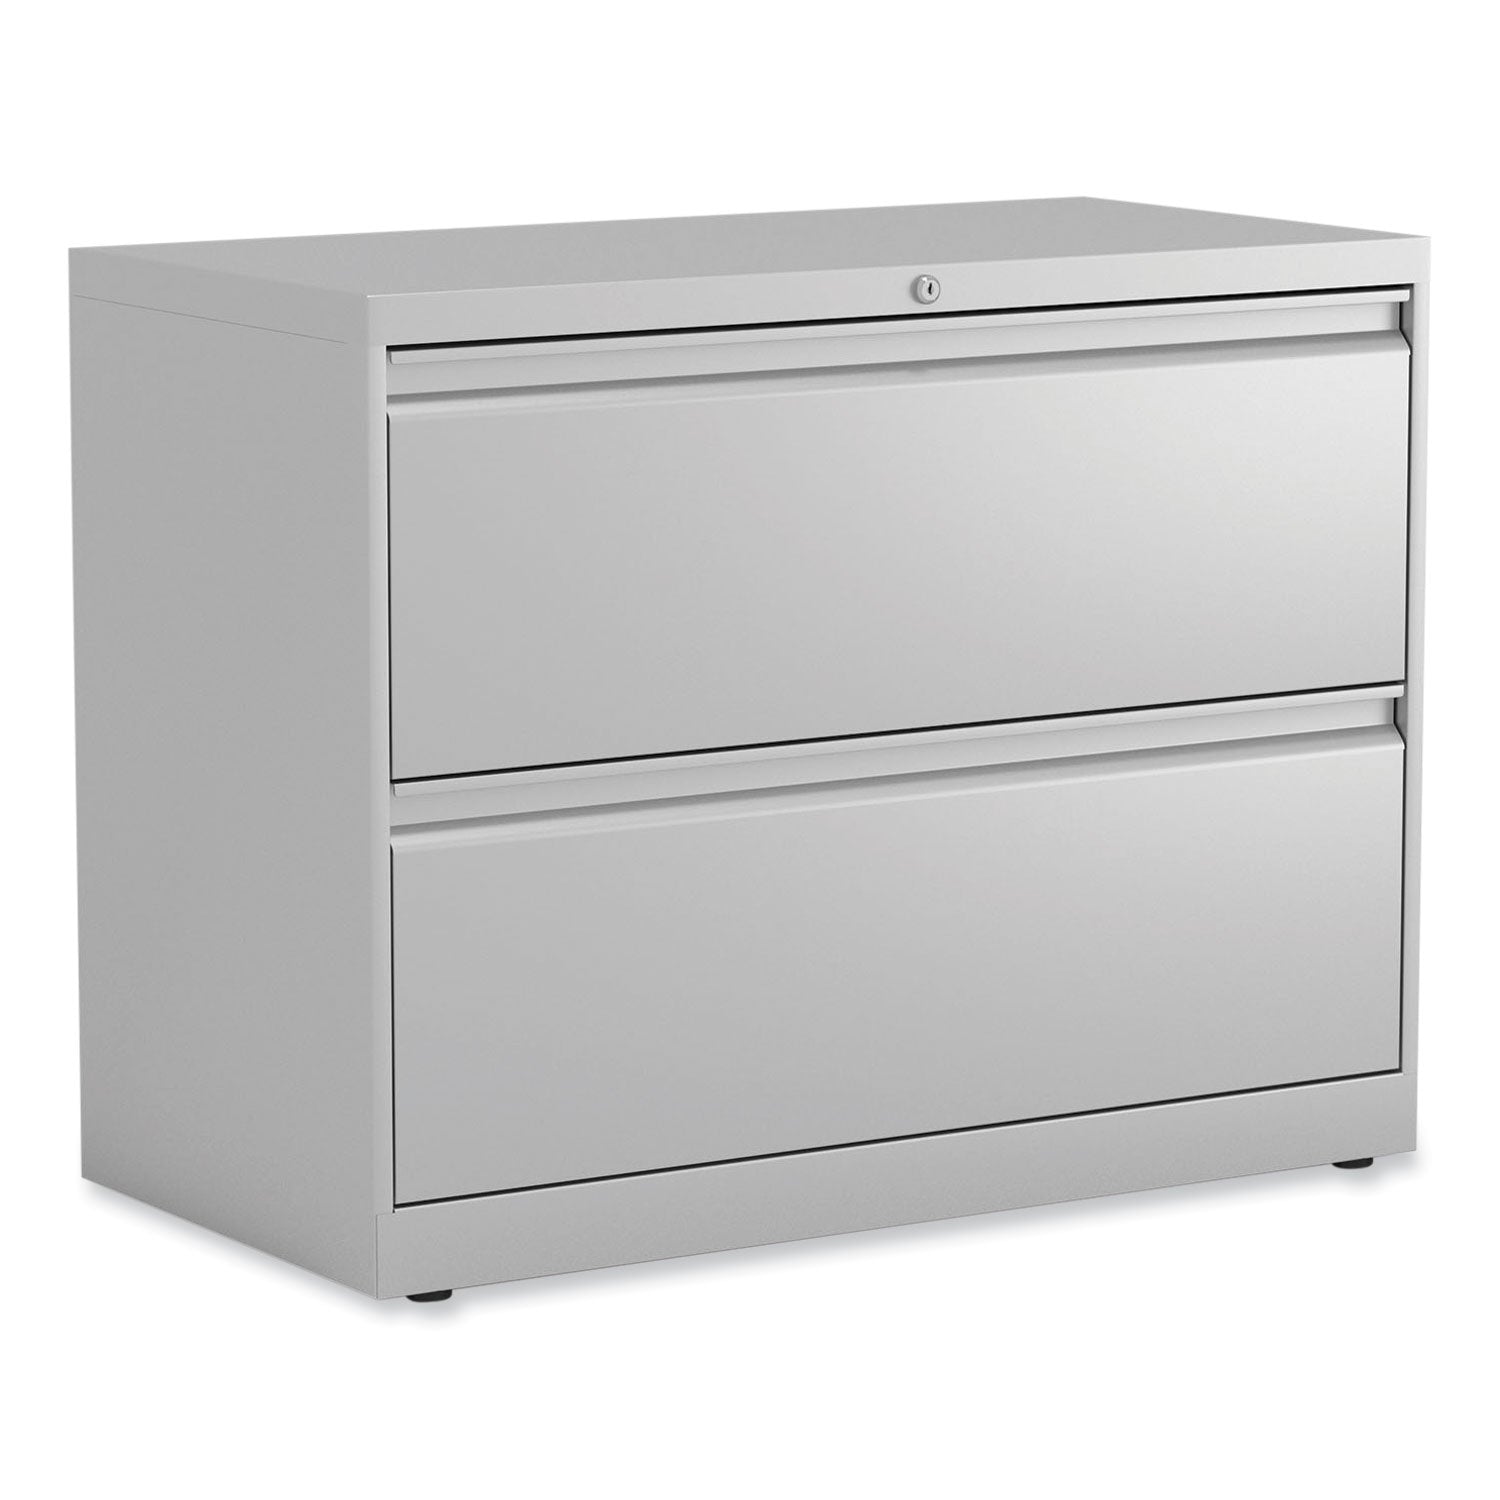 lateral-file-2-legal-letter-size-file-drawers-light-gray-36-x-1863-x-28_alehlf3629lg - 1